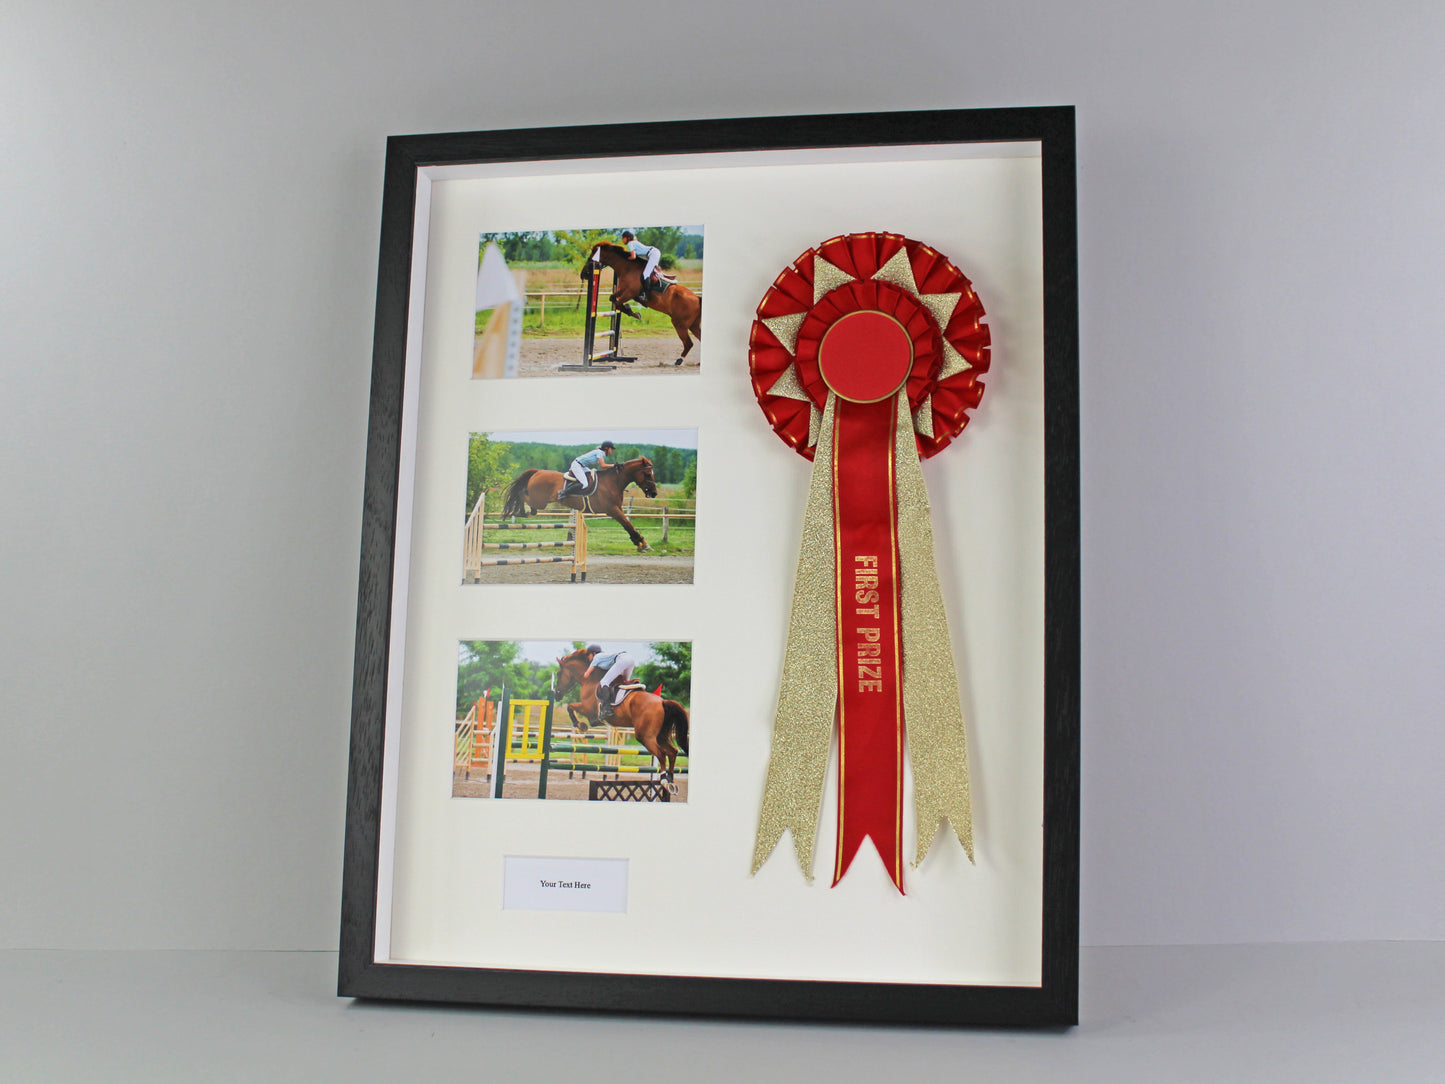 Personalised Rosette Display Frame. 40x50. Suits a Rosette, Three 6x4" Photographs, with an aperture for text